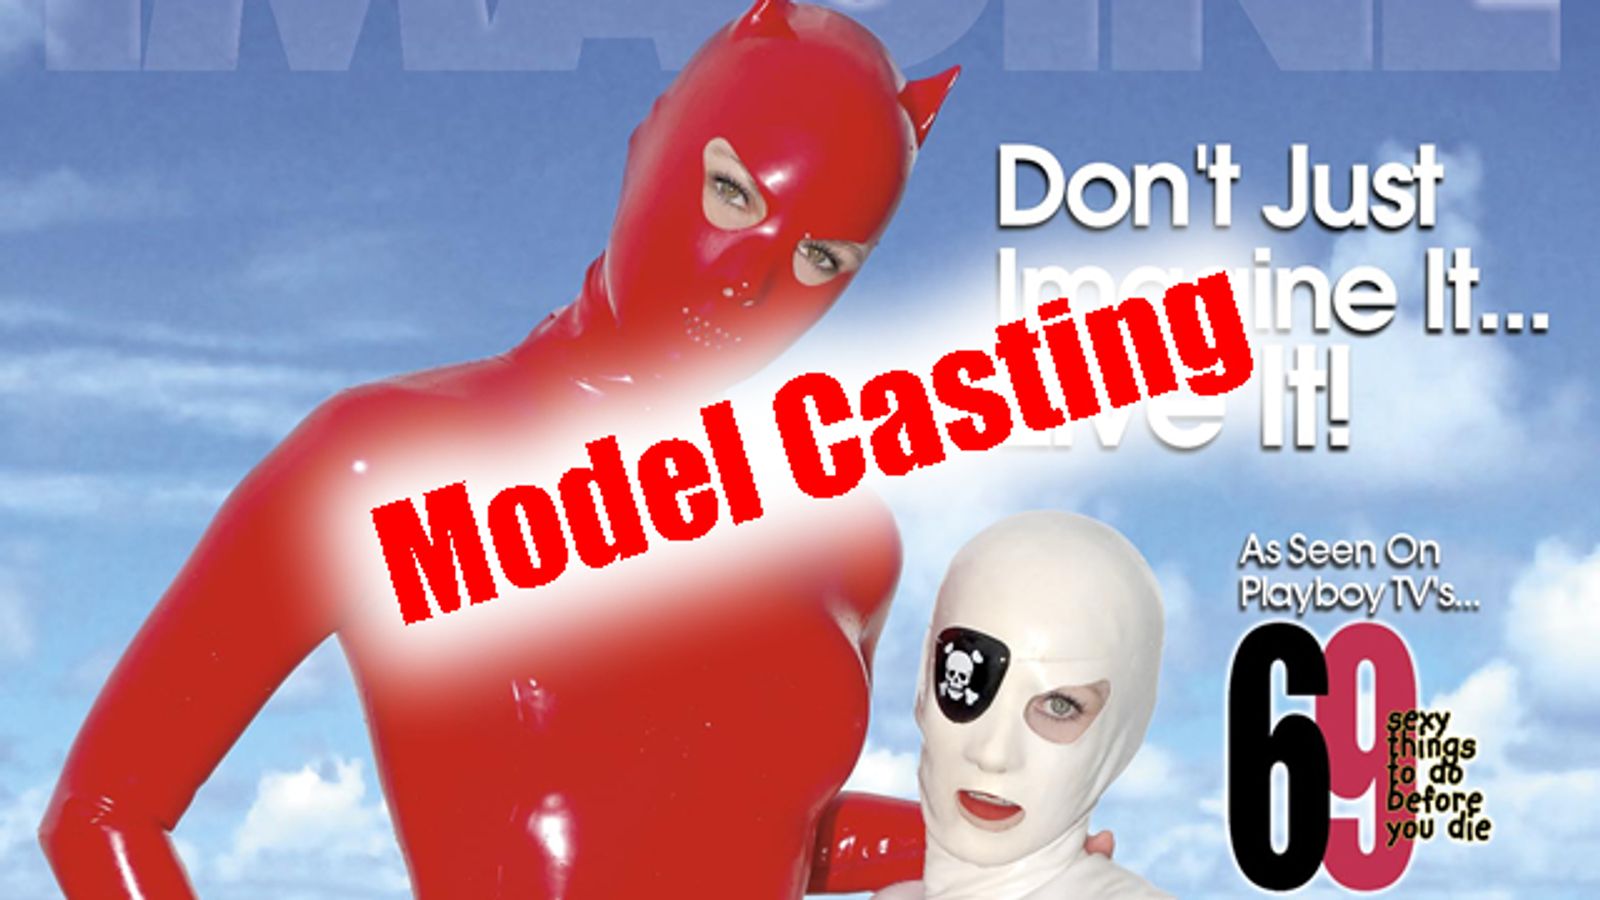 Kink in the Caribbean 12 Fetish Model Casting Call